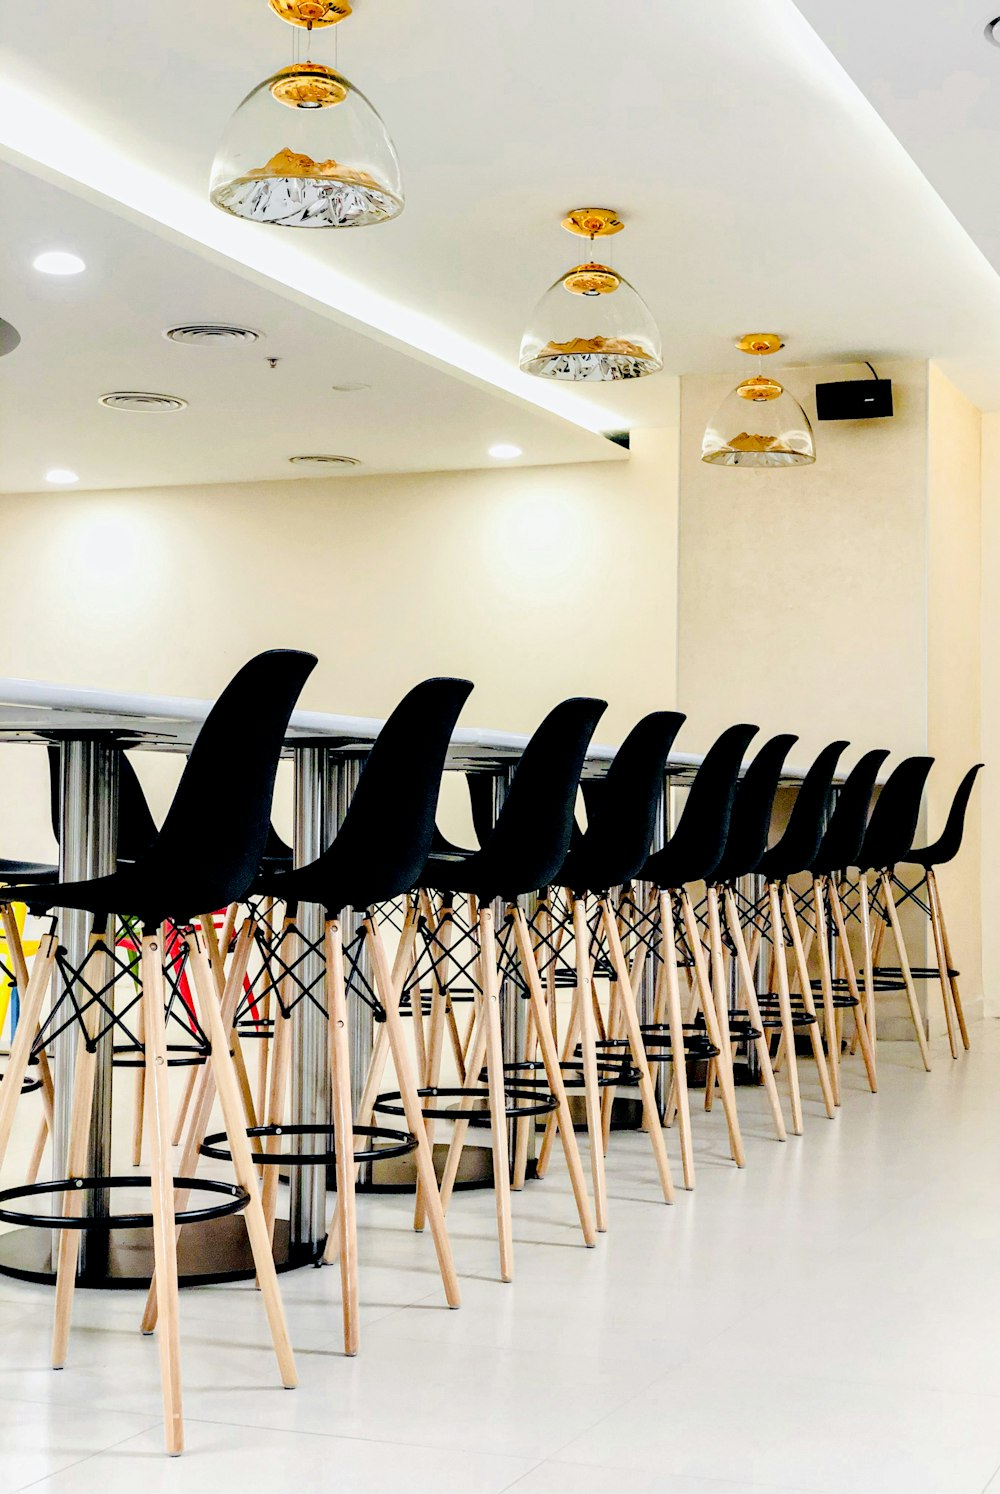 white metal folding chairs inside room